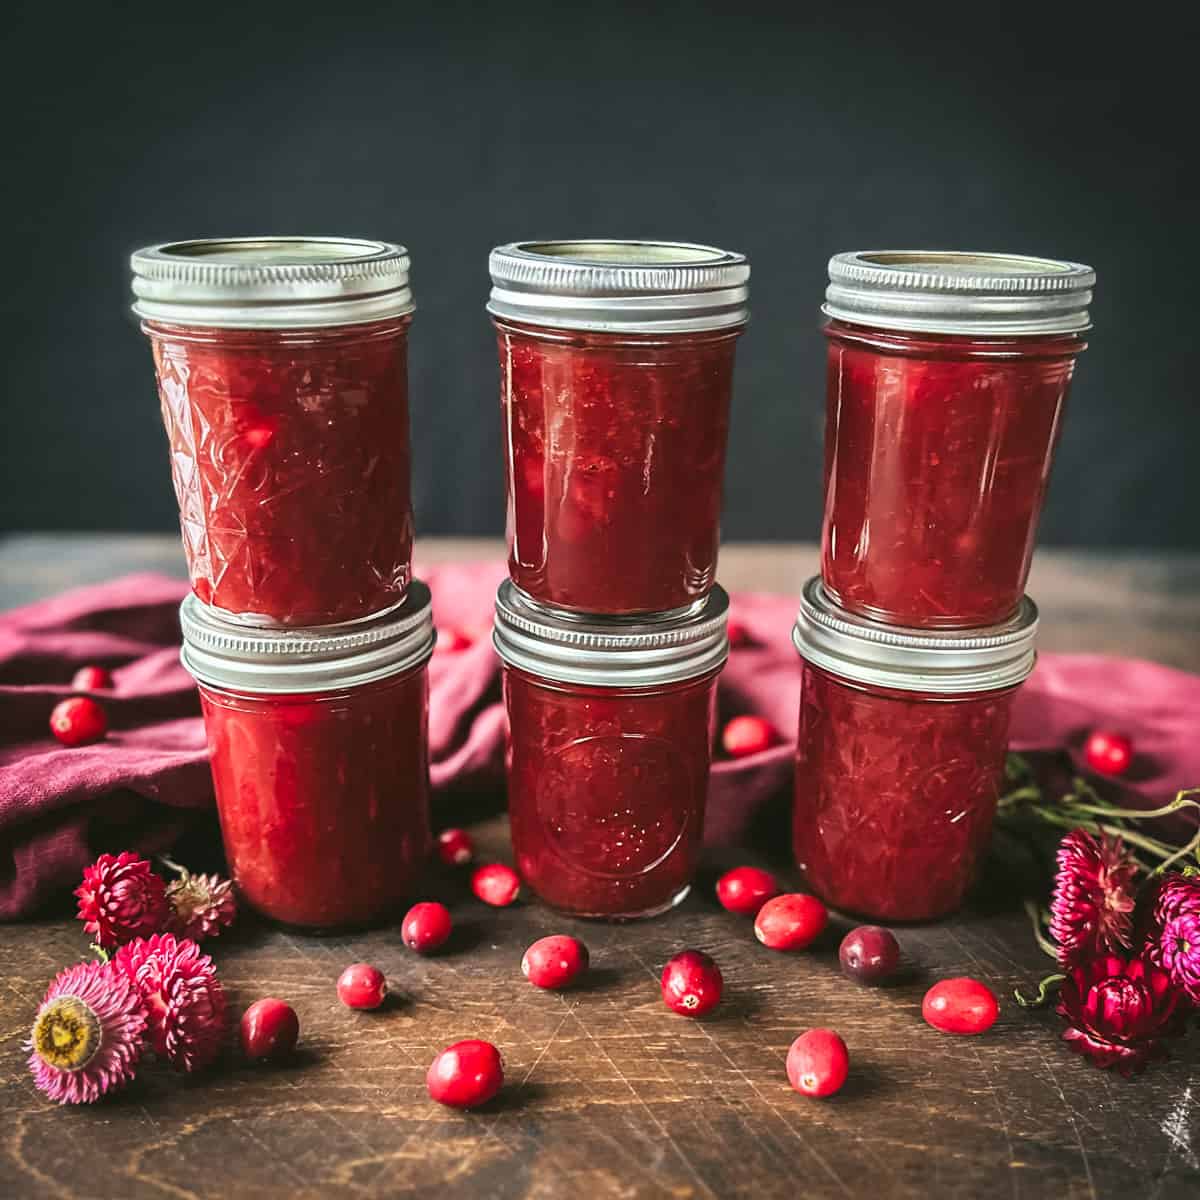 6 jars of canned cranberry stacked 2 high, on a dark wood surface, surrounded by fresh cranberries, dried flowers, and a burgundy cloth. 